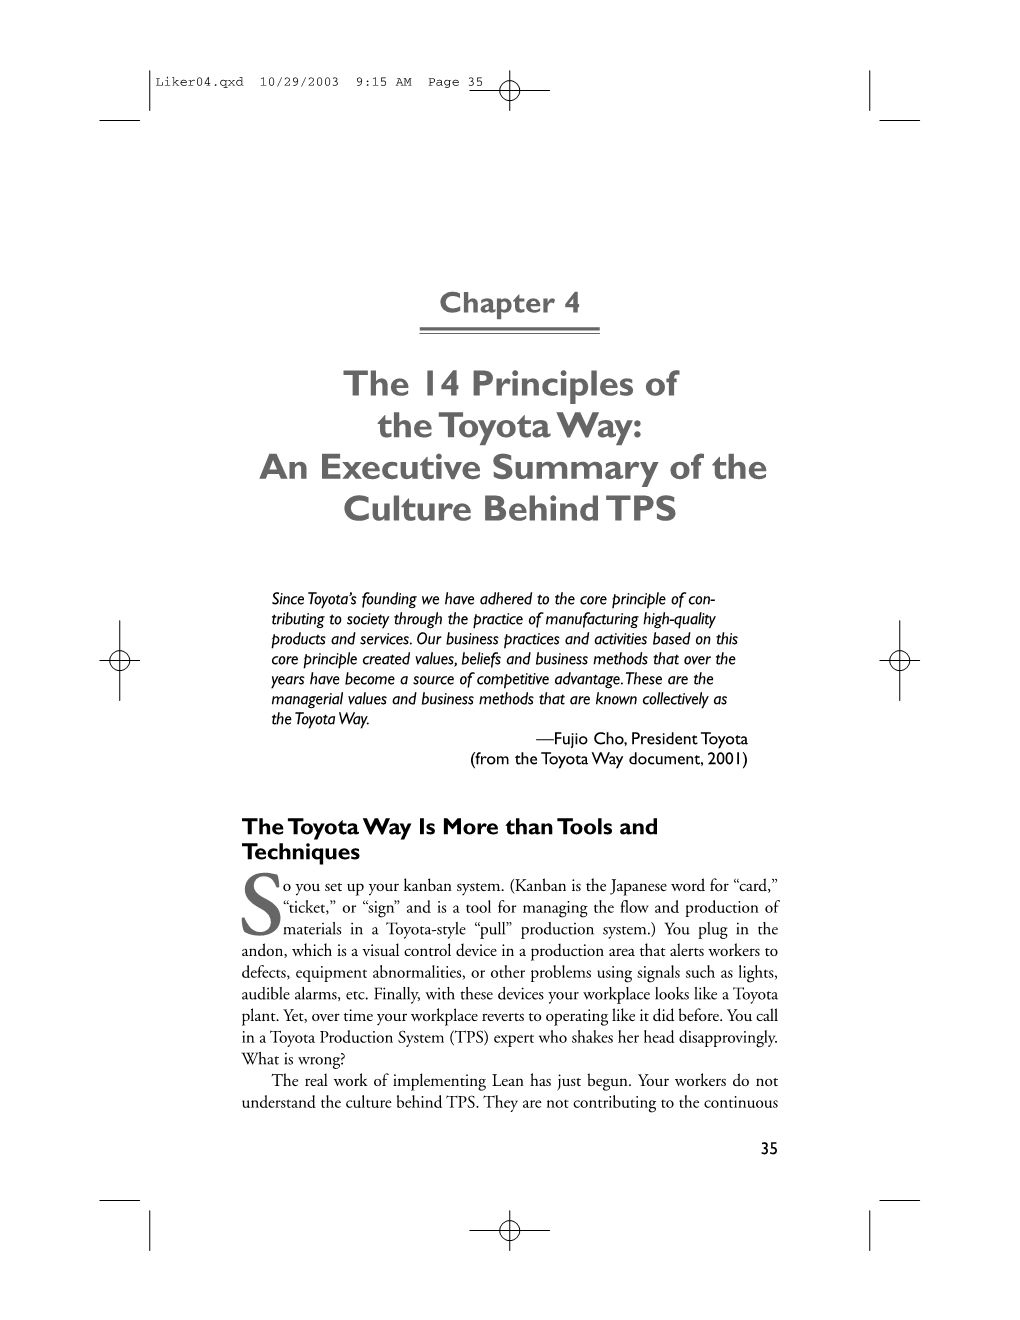 The 14 Principles of the Toyota Way: an Executive Summary of the Culture Behind TPS